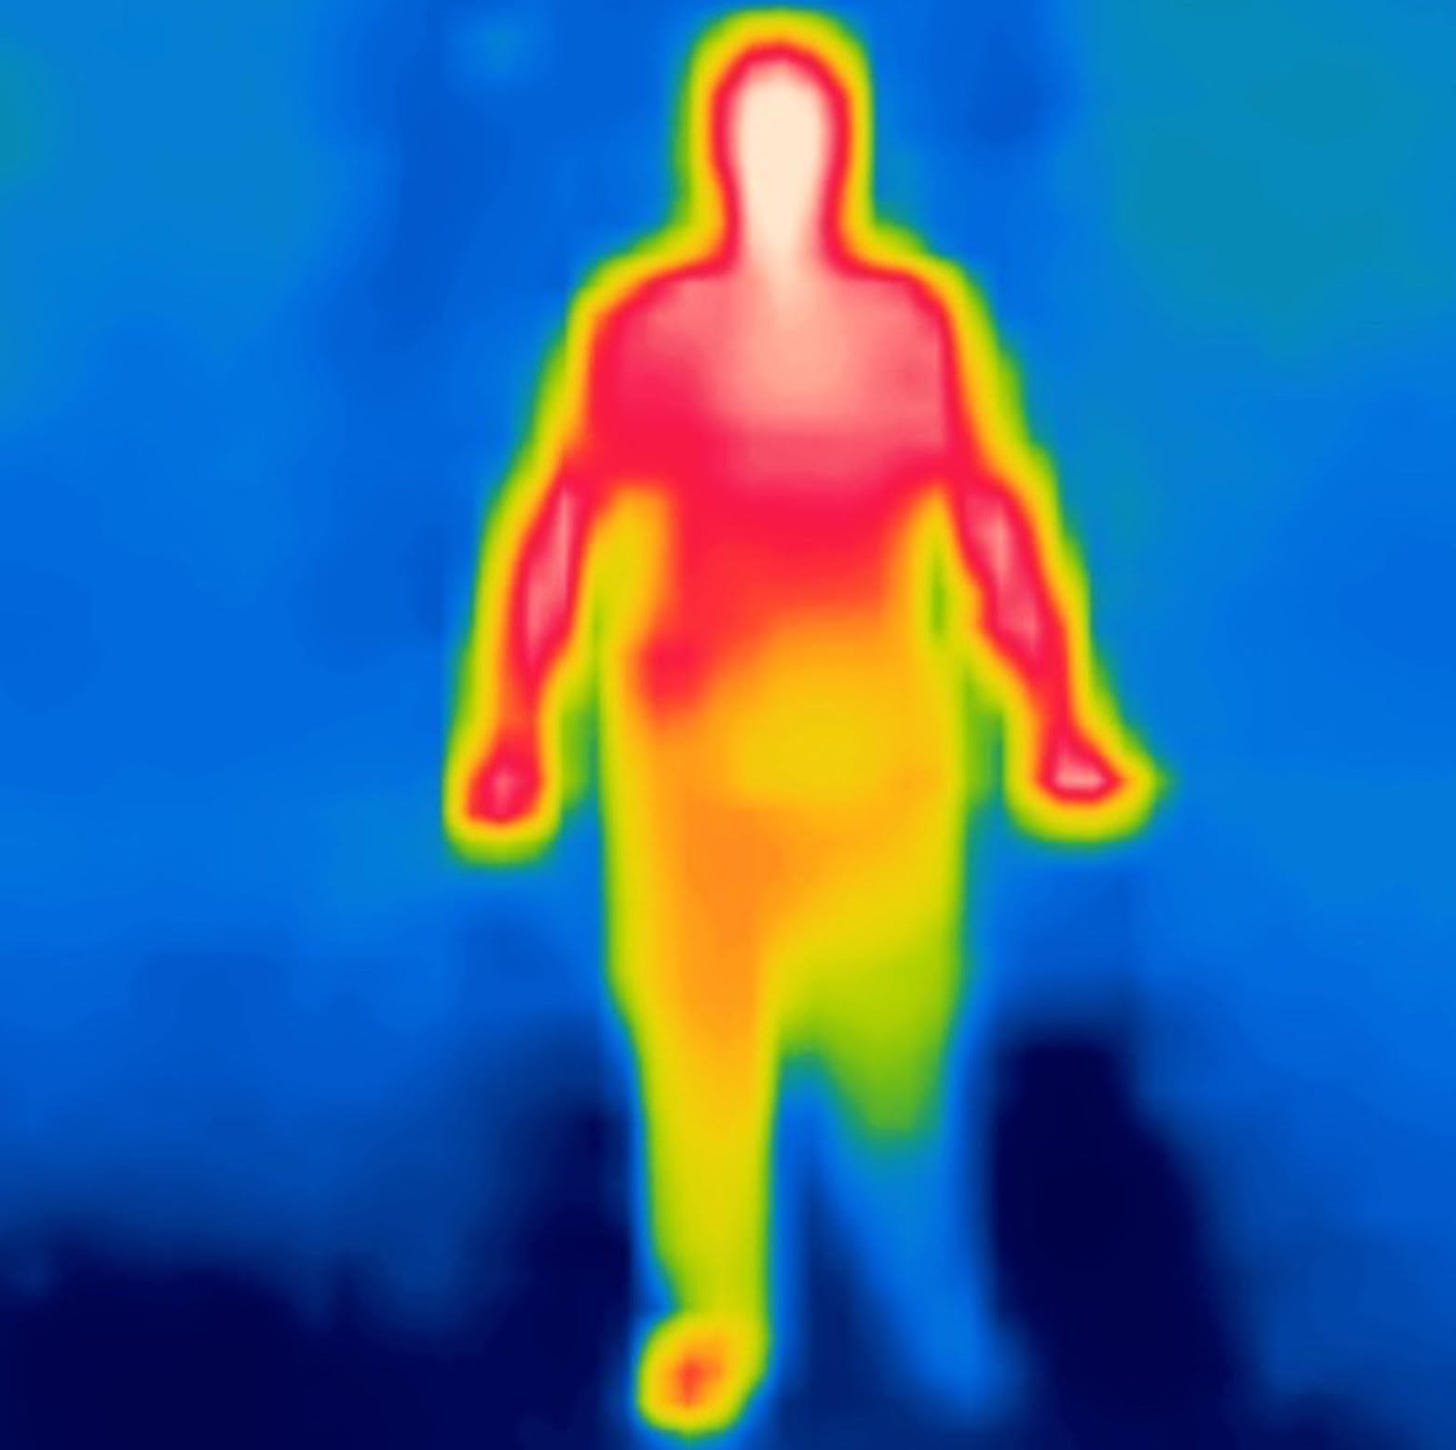 Thermography of David Gissen by Philippe Rahm, 2019. This thermographic portrait of me was made in collaboration with the architect Philippe Rahm. The thermographic image captures the heat outline of my body underneath my clothes and reveals that I wear a full-length prosthesis on my left side. It demonstrates the heat-insulating property of artificial limbs, as my residual limb extends down to midcalf but can barely be seen in the image.